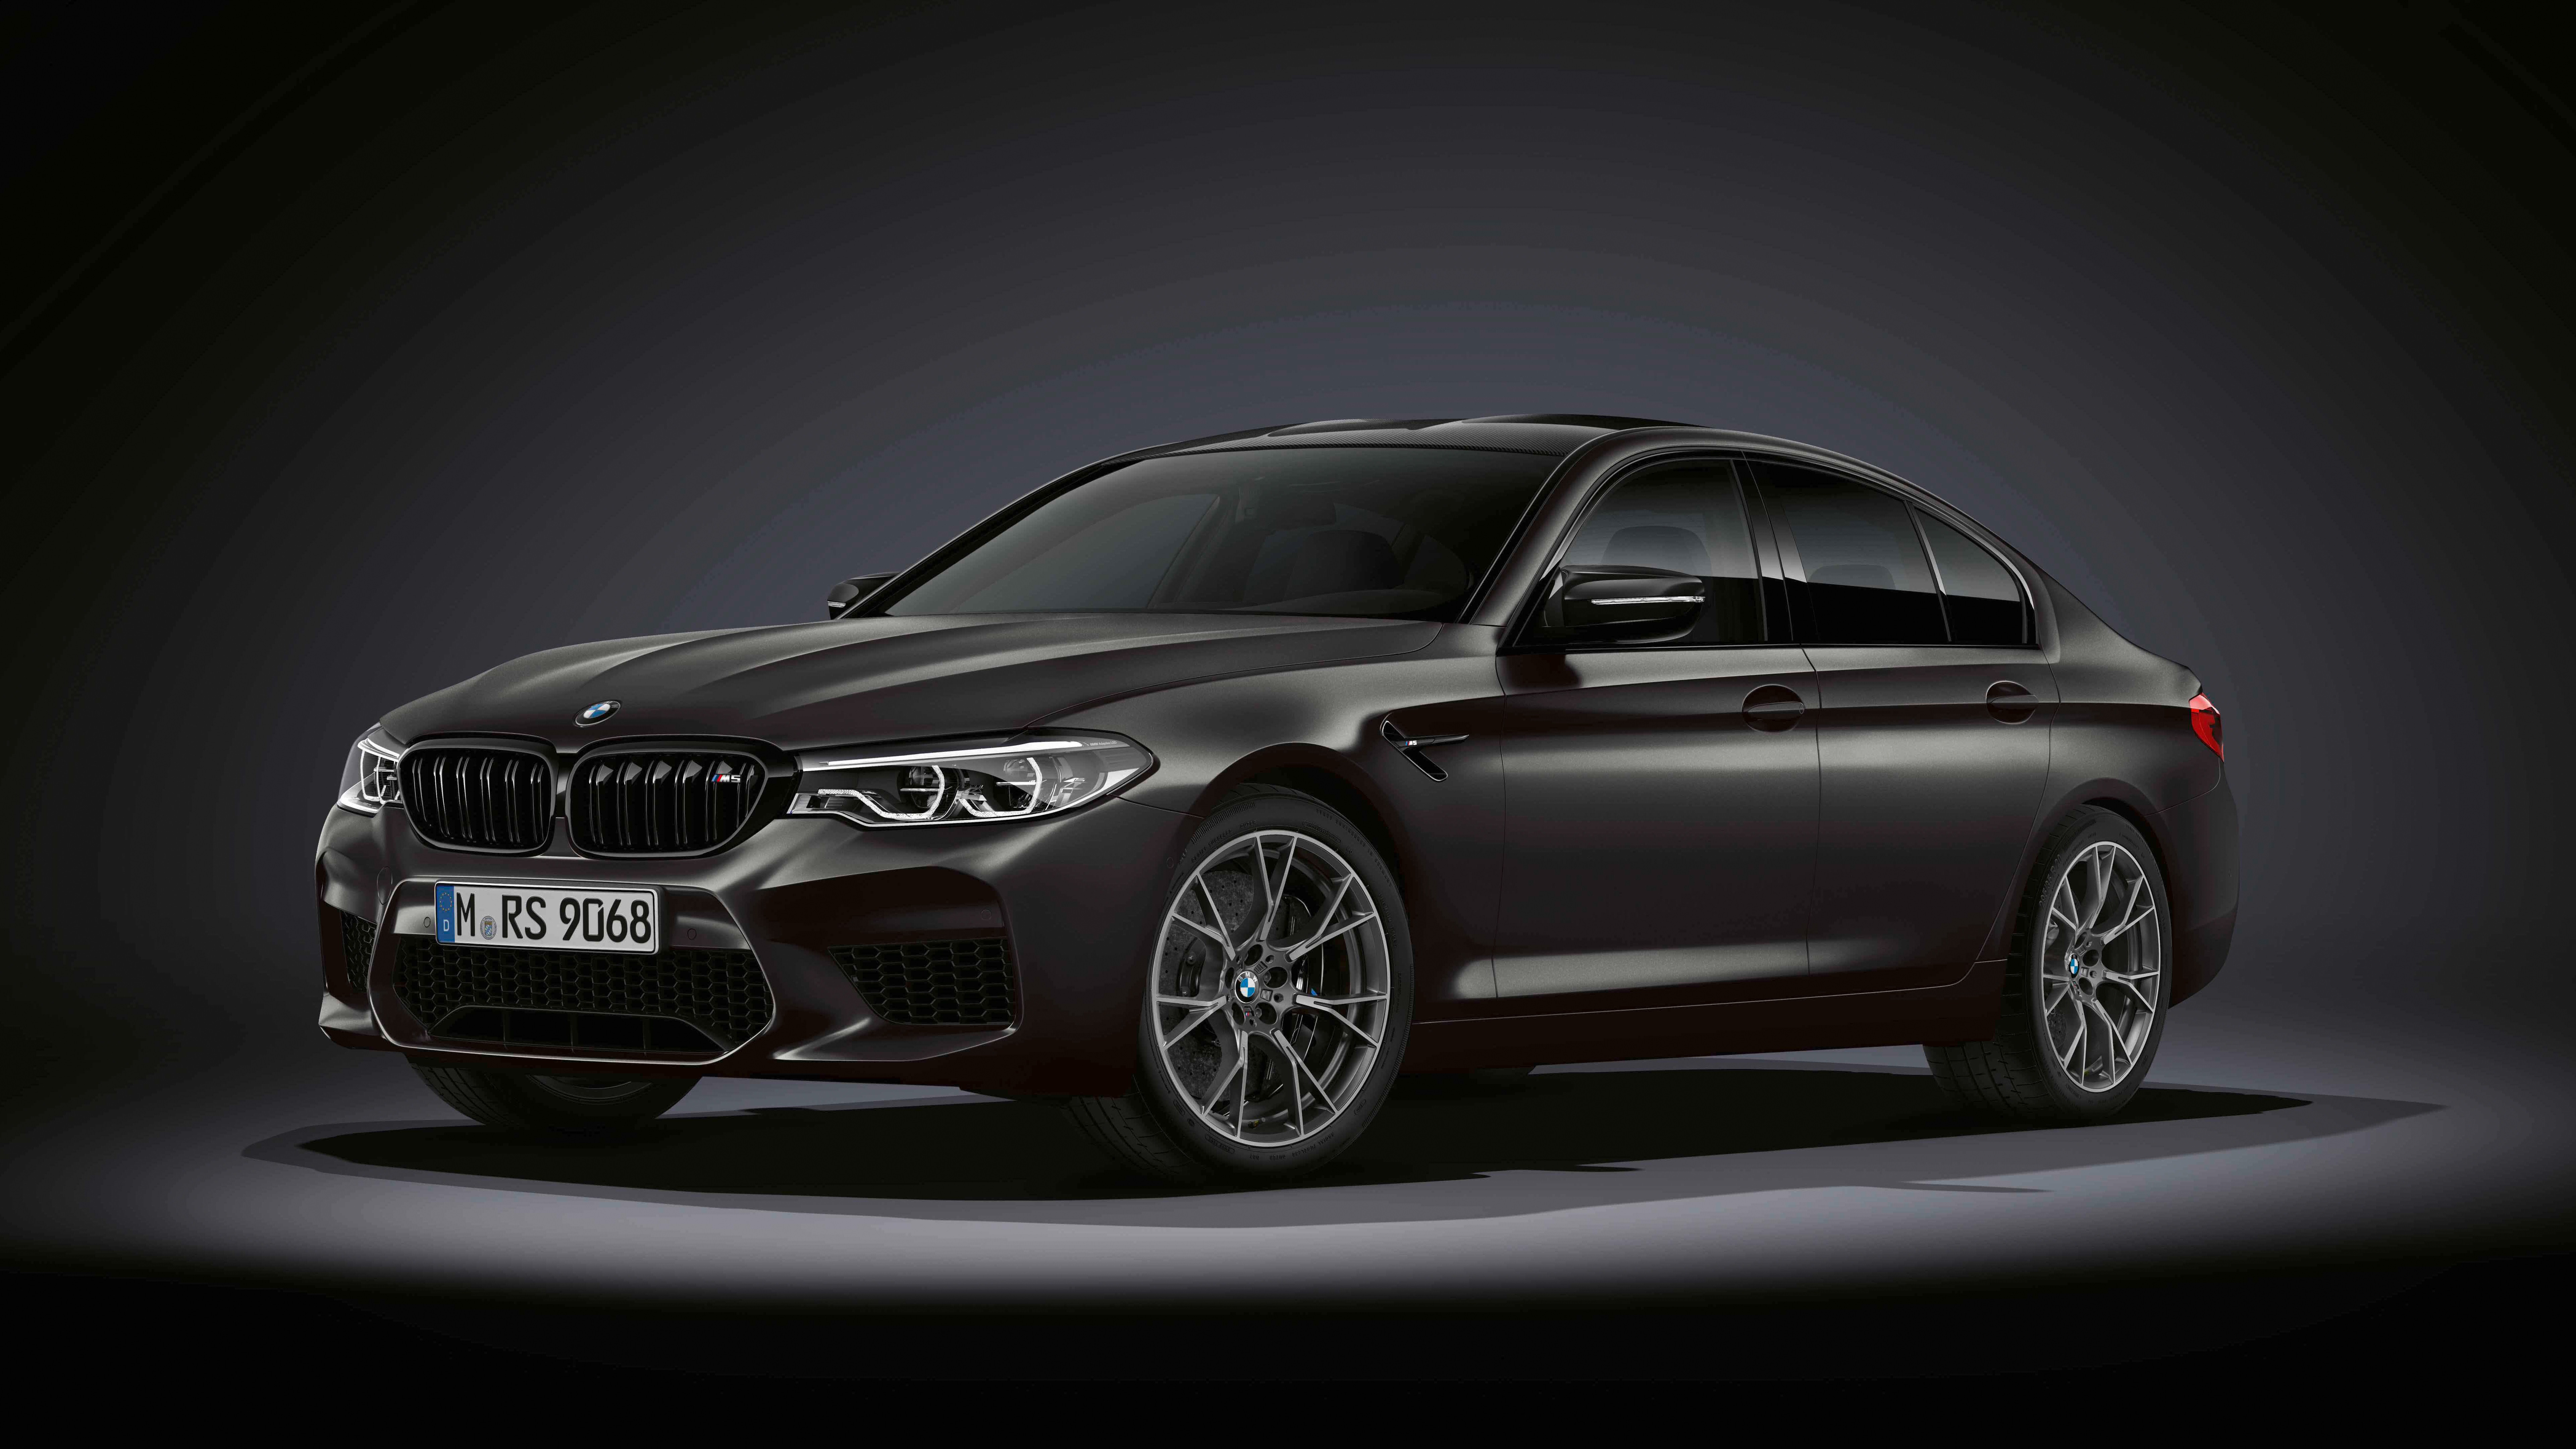 8K Wallpaper of 2019 BMW M5 Competition Edition 35 Jahre Car. HD